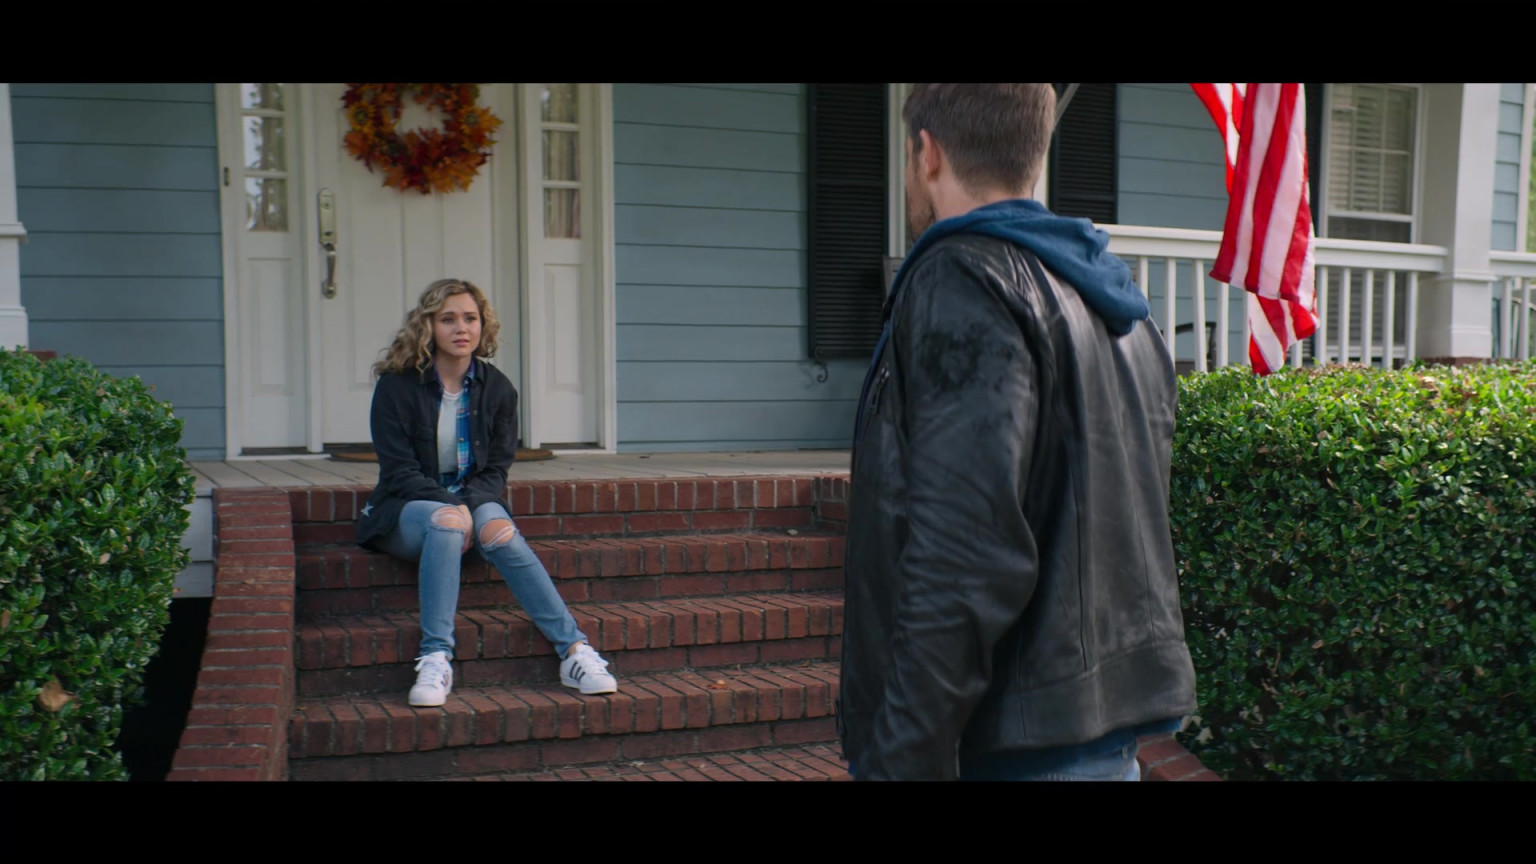 Adidas Sneakers Of Brec Bassinger As Courtney Whitmore In Stargirl S01e11 Shining Knight 2020